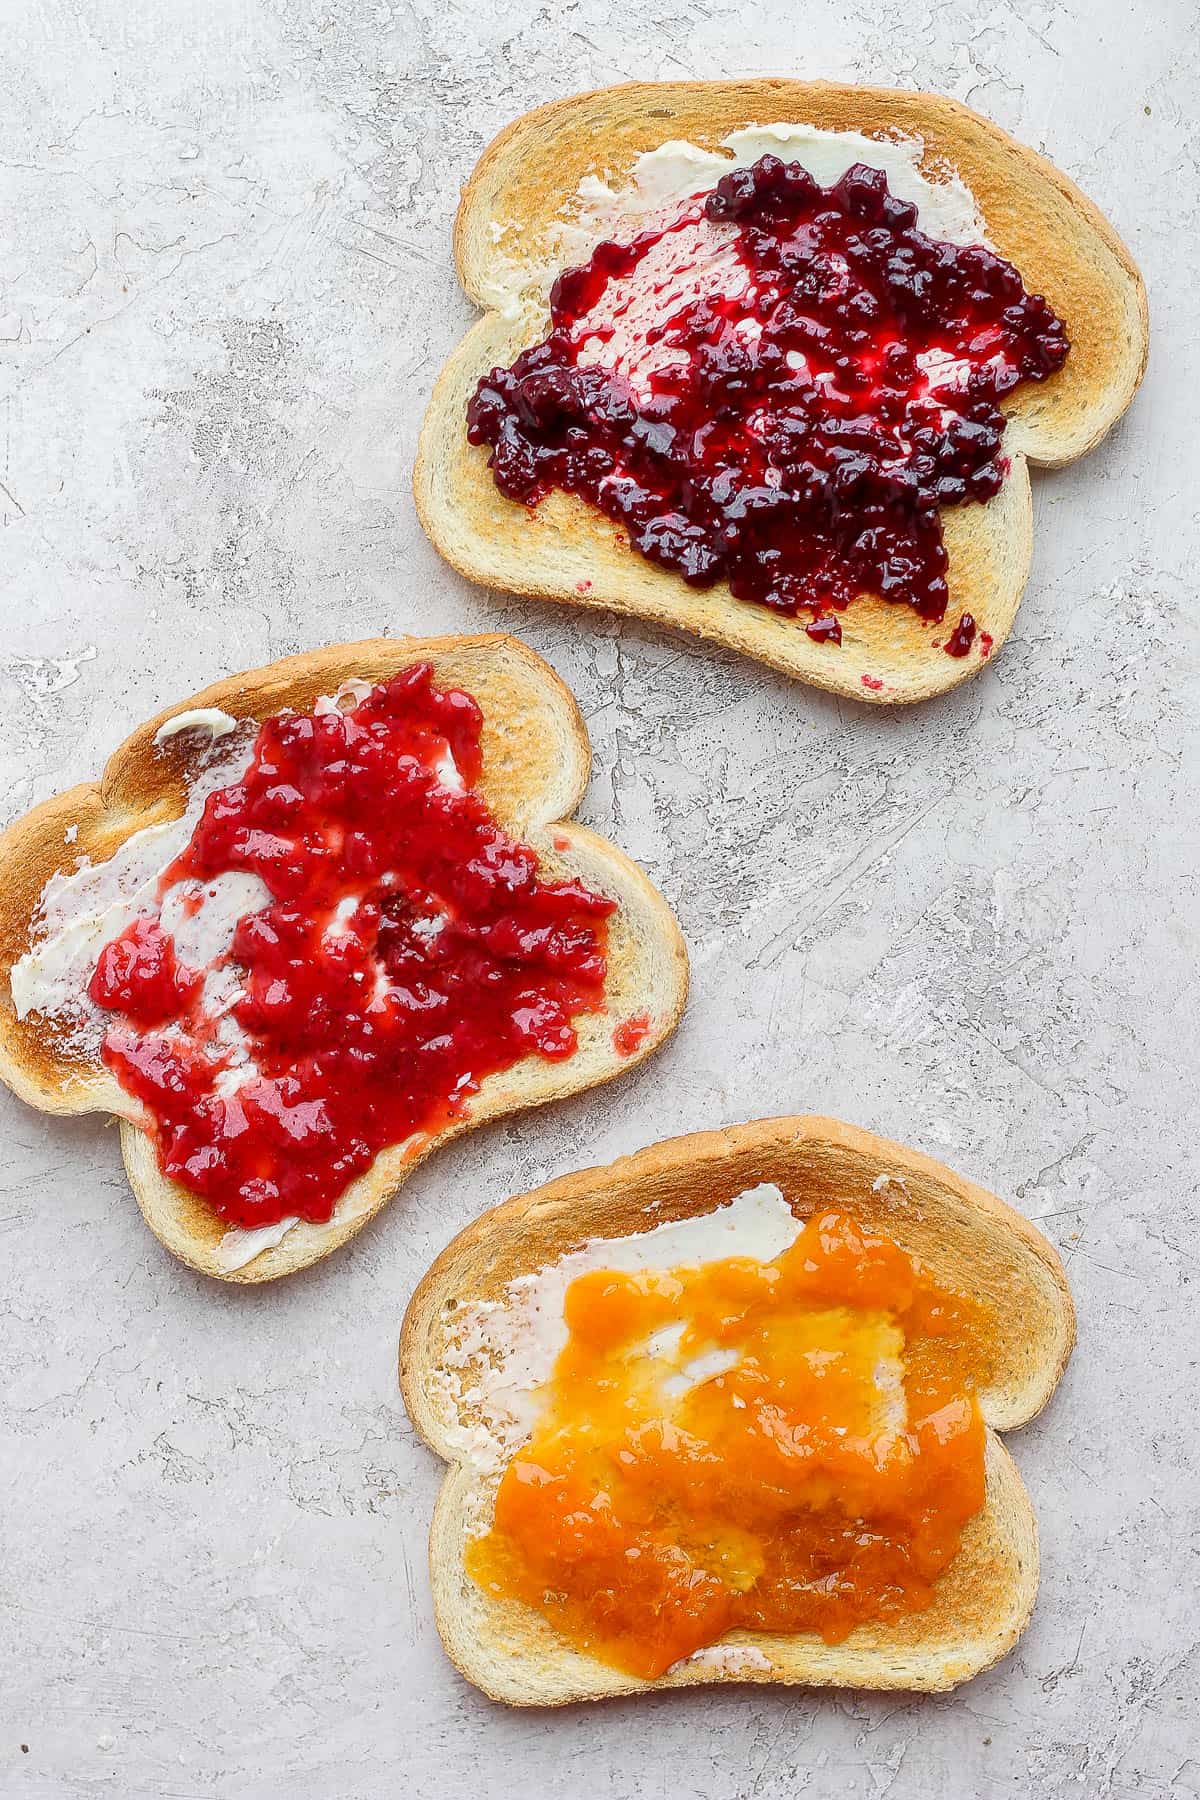 3 pieces of toast with butter and different flavored jams on each.